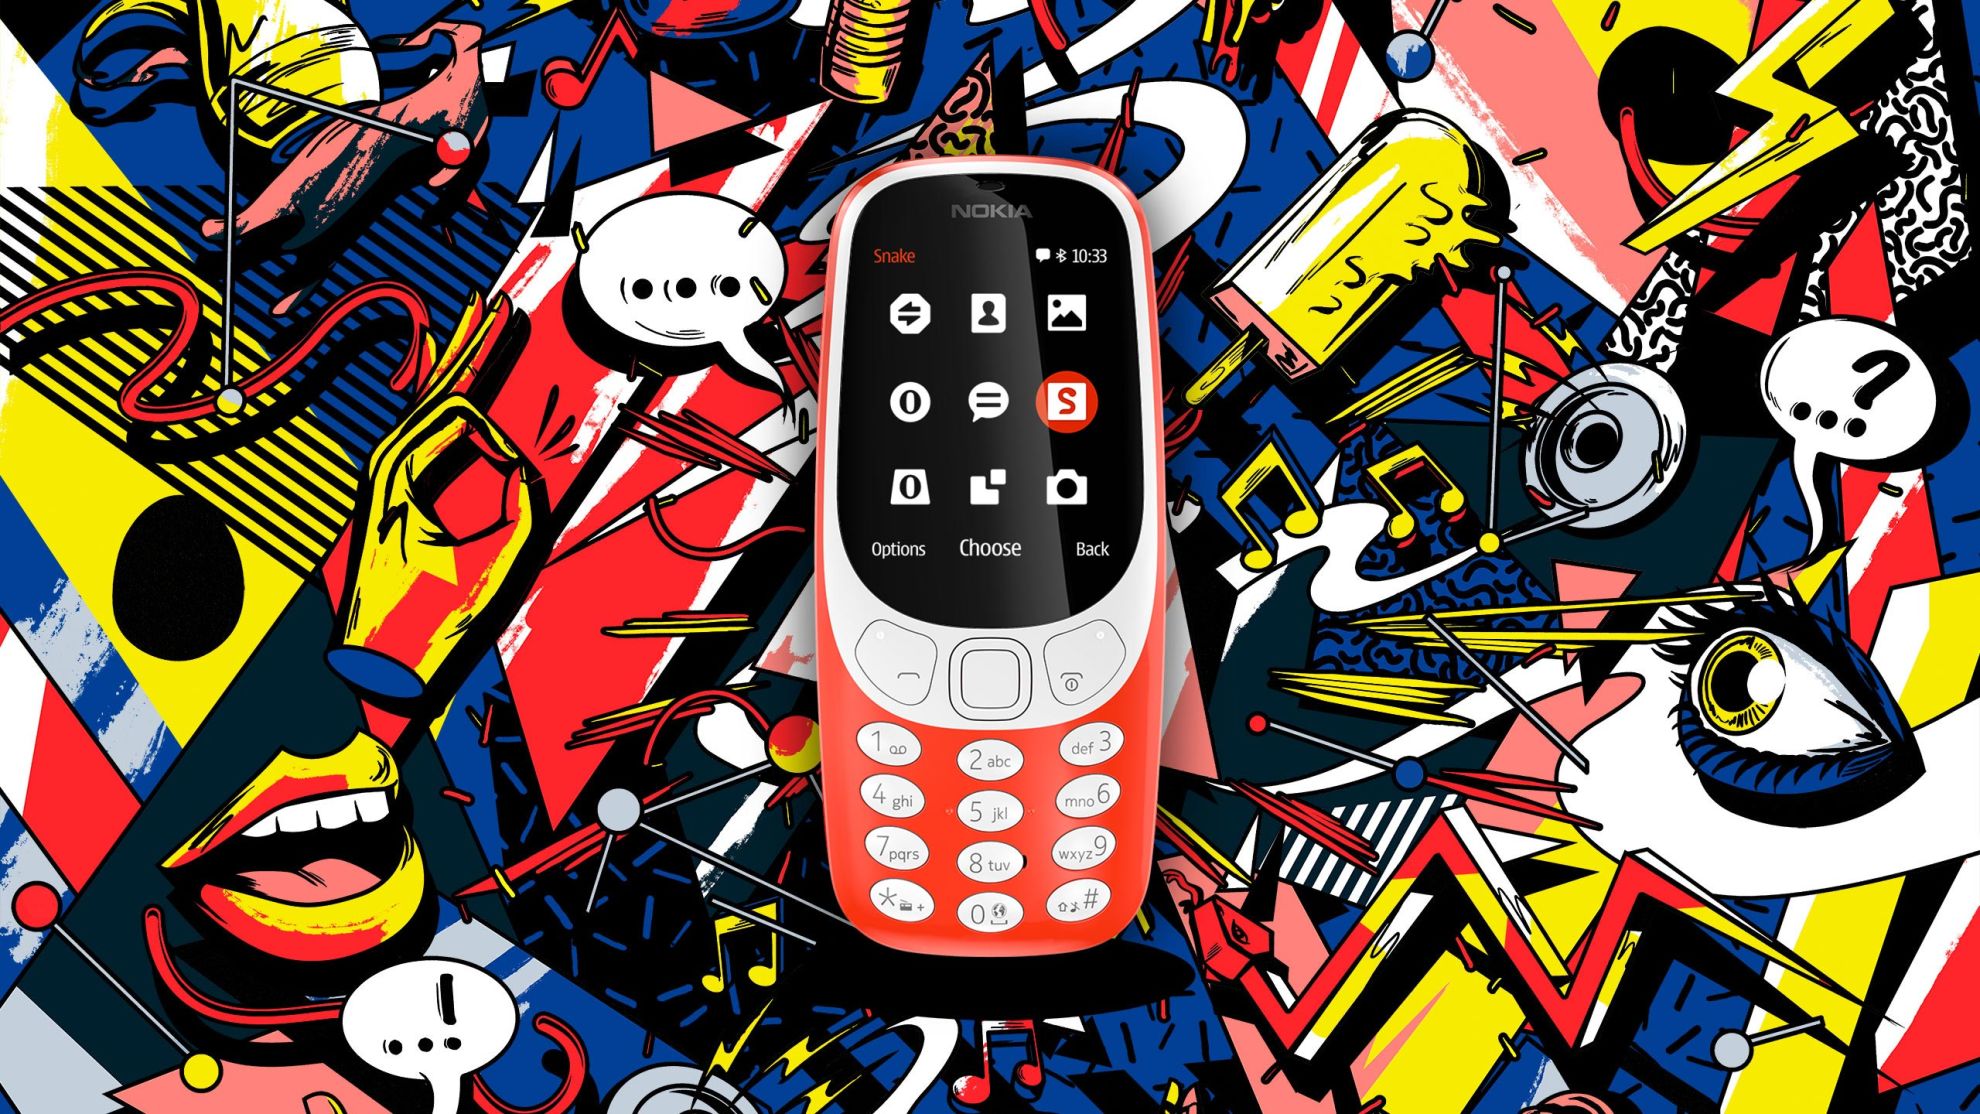 Nokia 3310 Mobile Phone at Rs 3289, New Items in Jodhpur